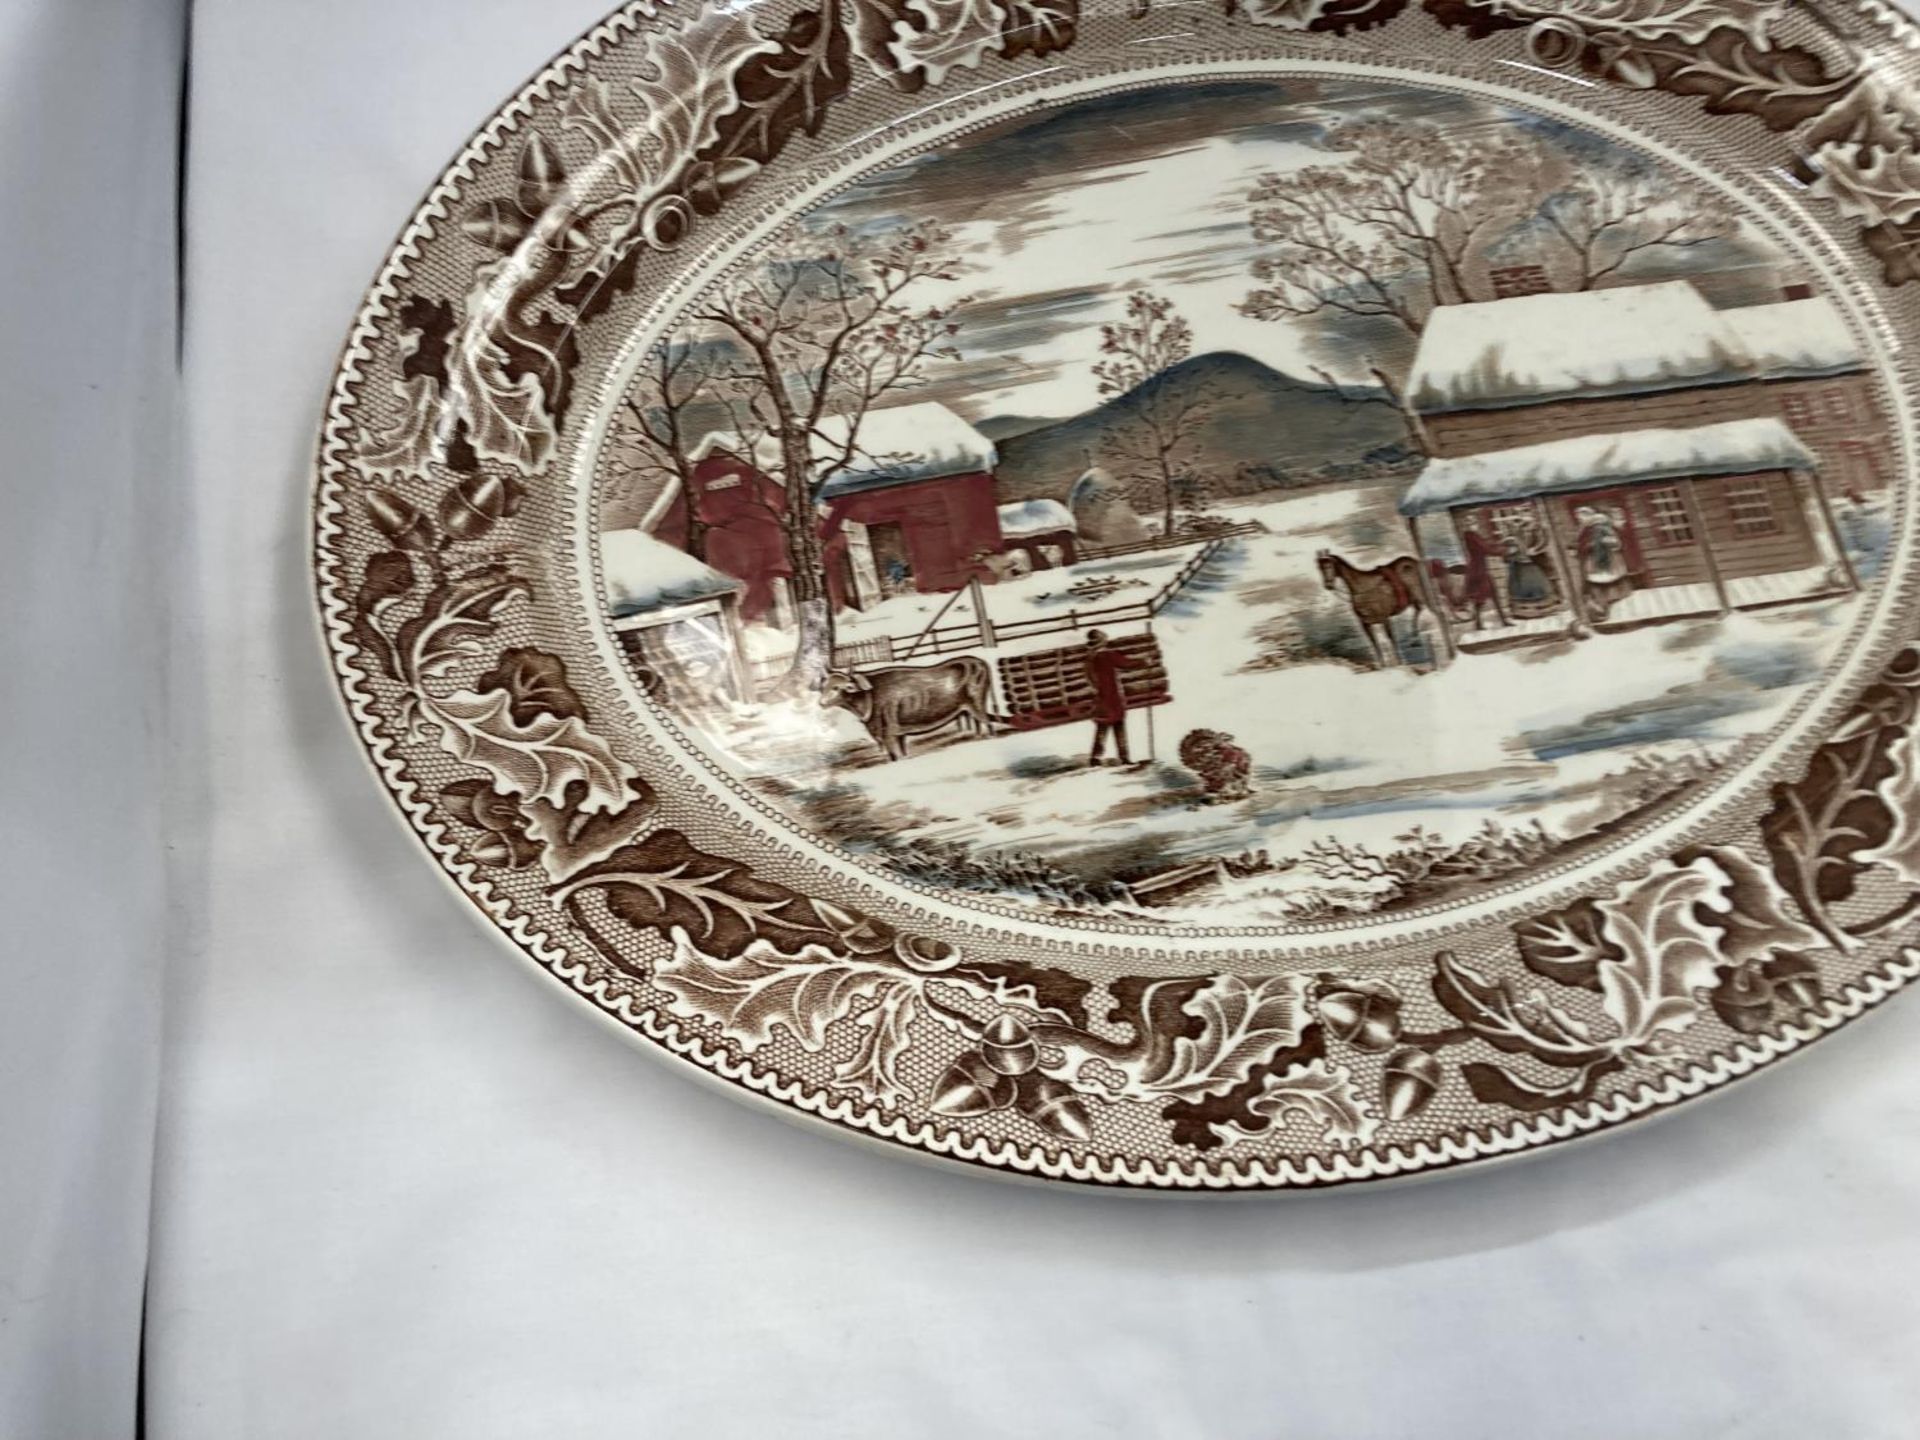 A LARGE JOHNSON BROS OVAL MEAT PLATTER WITH A FARMYARD SCENE - HOME FOR HISTORIC AMERICA - Image 4 of 9